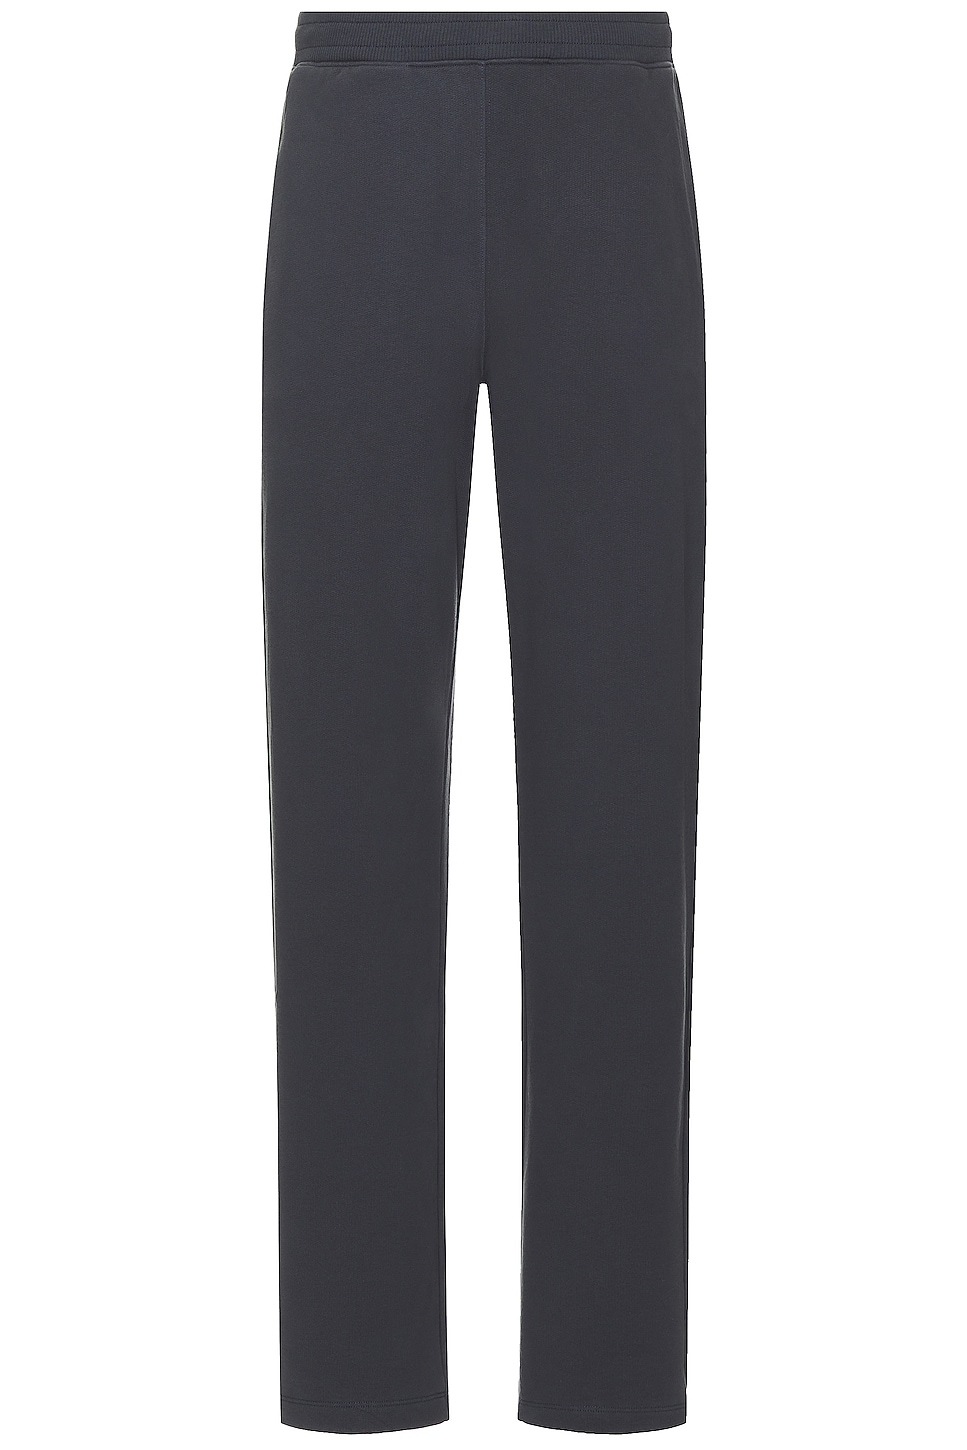 Image 1 of Bally Sweatpants in Stone